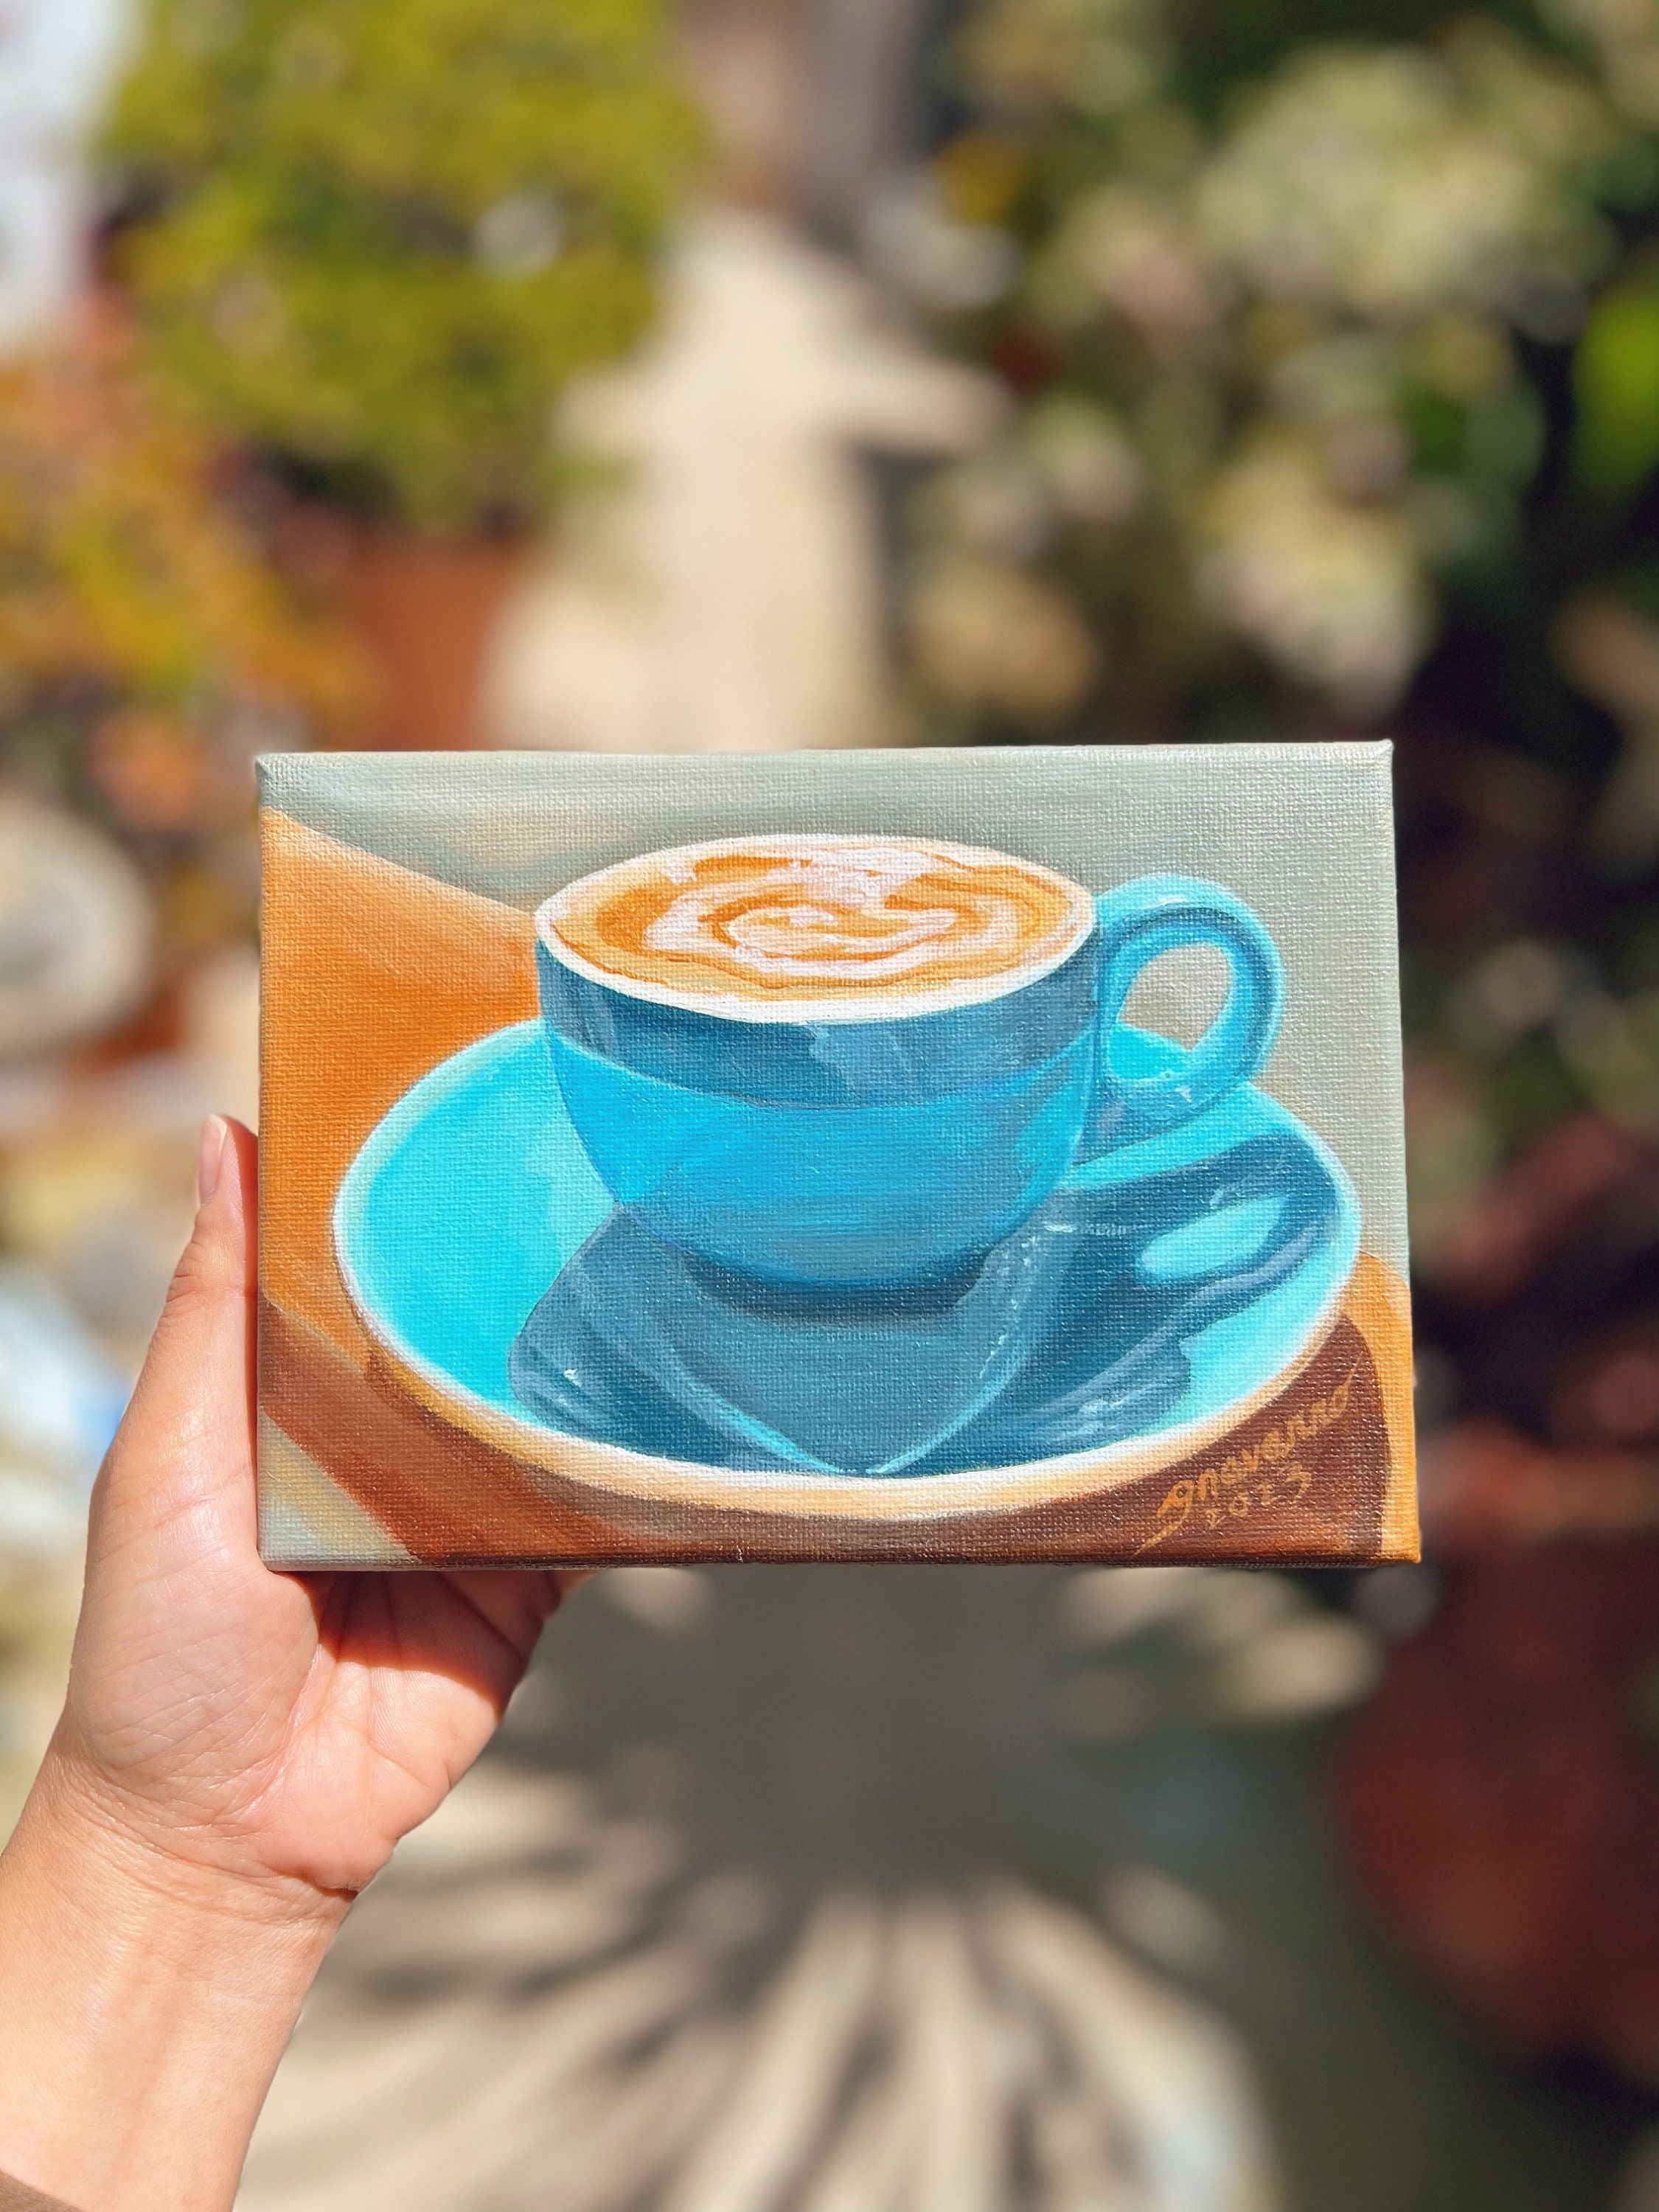 3D Coffee Mug of Cappuccino in a Creative & Aesthetic Wallart Art Board  Print for Sale by jemmycool